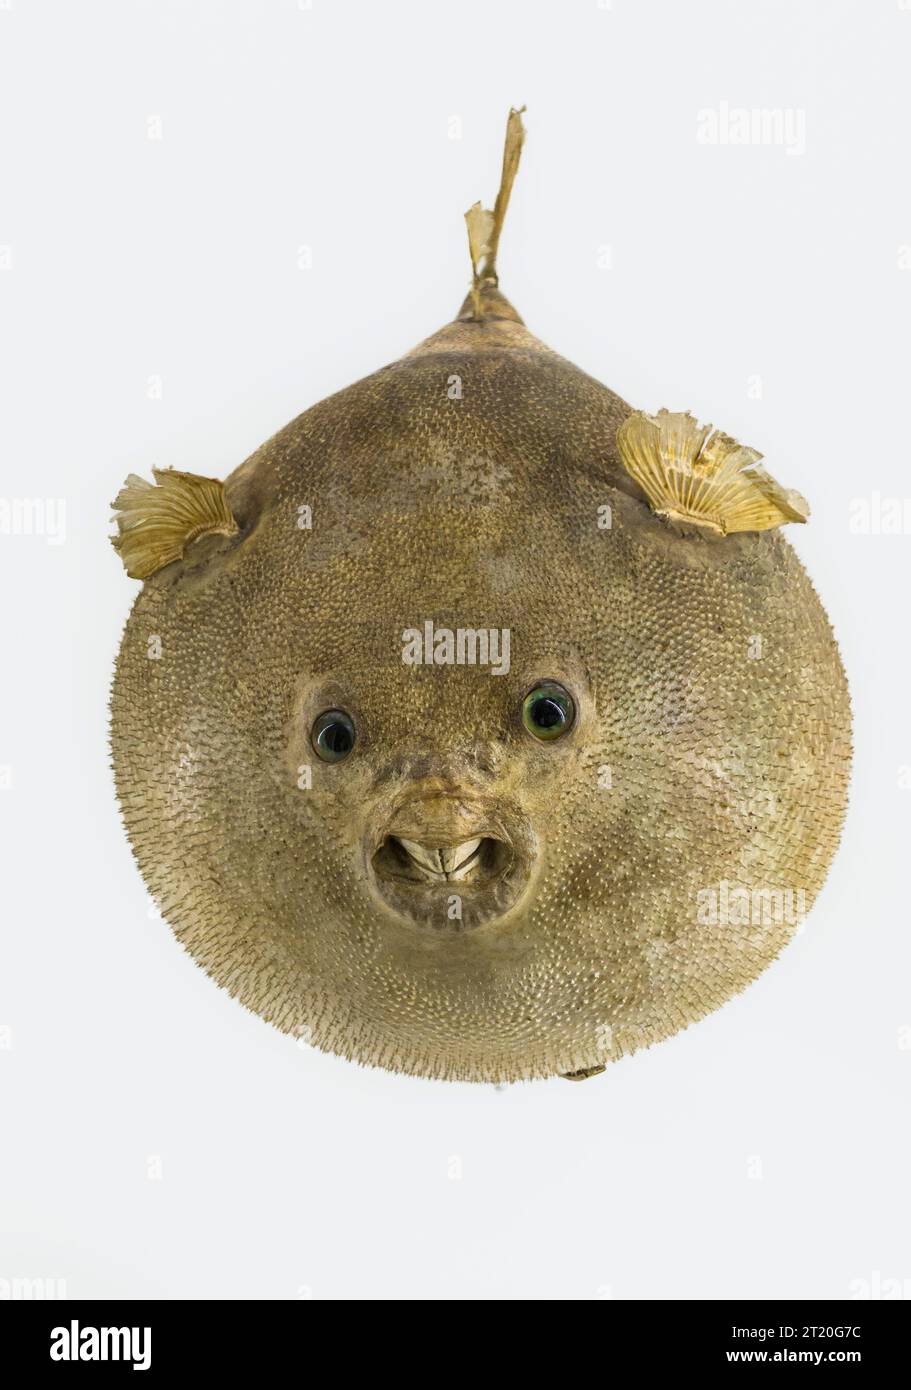 An old specimen of Arothron hispidus, the white-spotted puffer fish, in the 18c Museum of Zoology and Natural History (La Specola), Florence, Italy Stock Photo